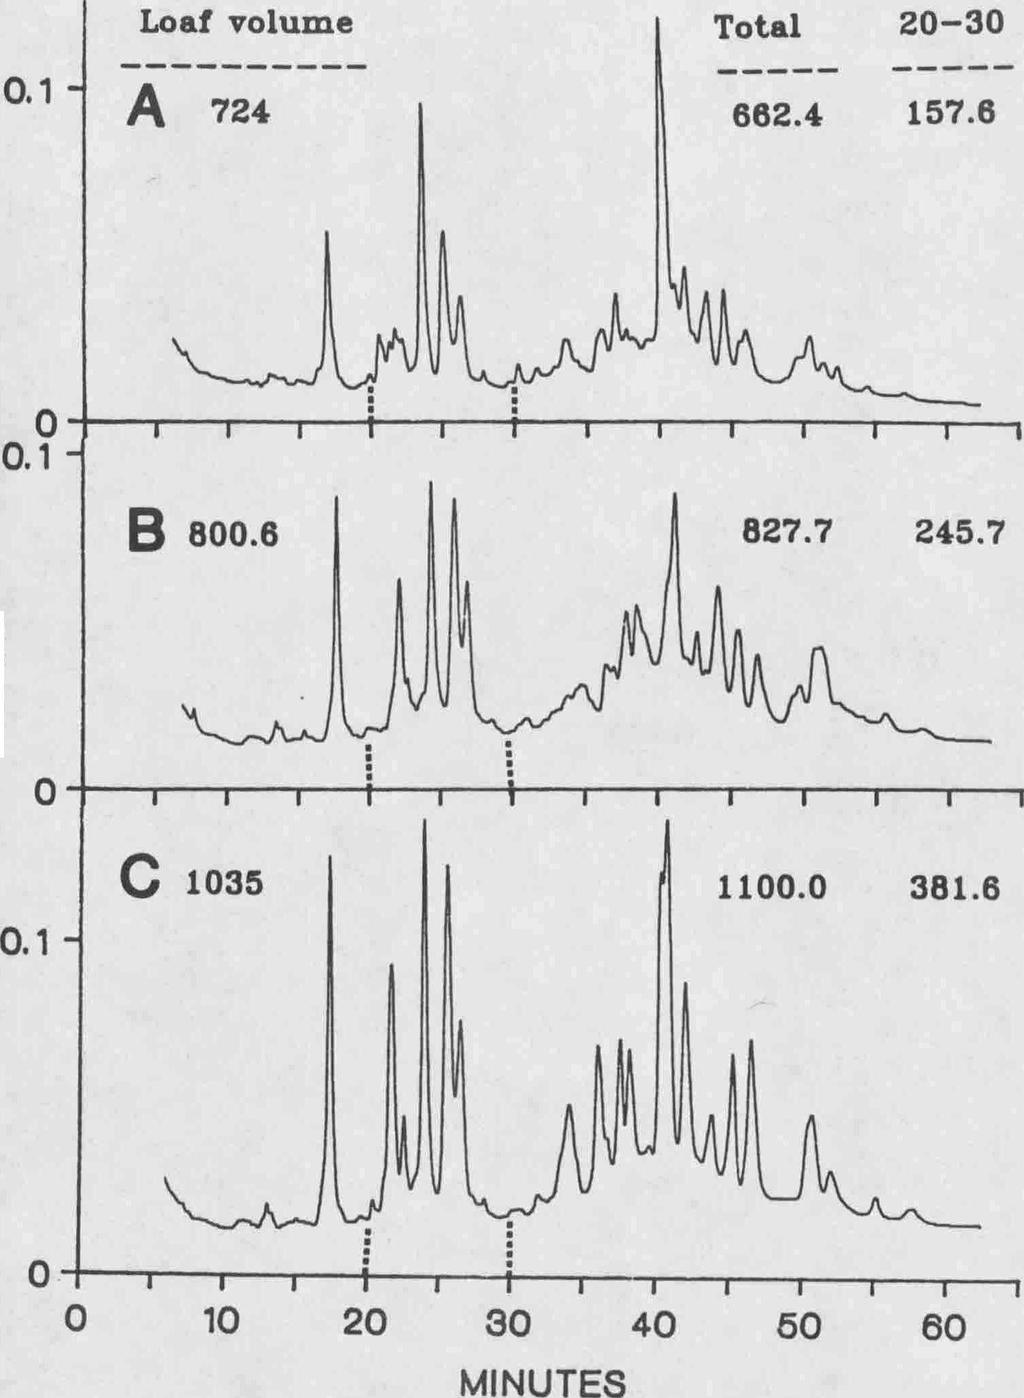 RP-HPLC chromatograms of three winter wheat cultivars varying in baking quality: